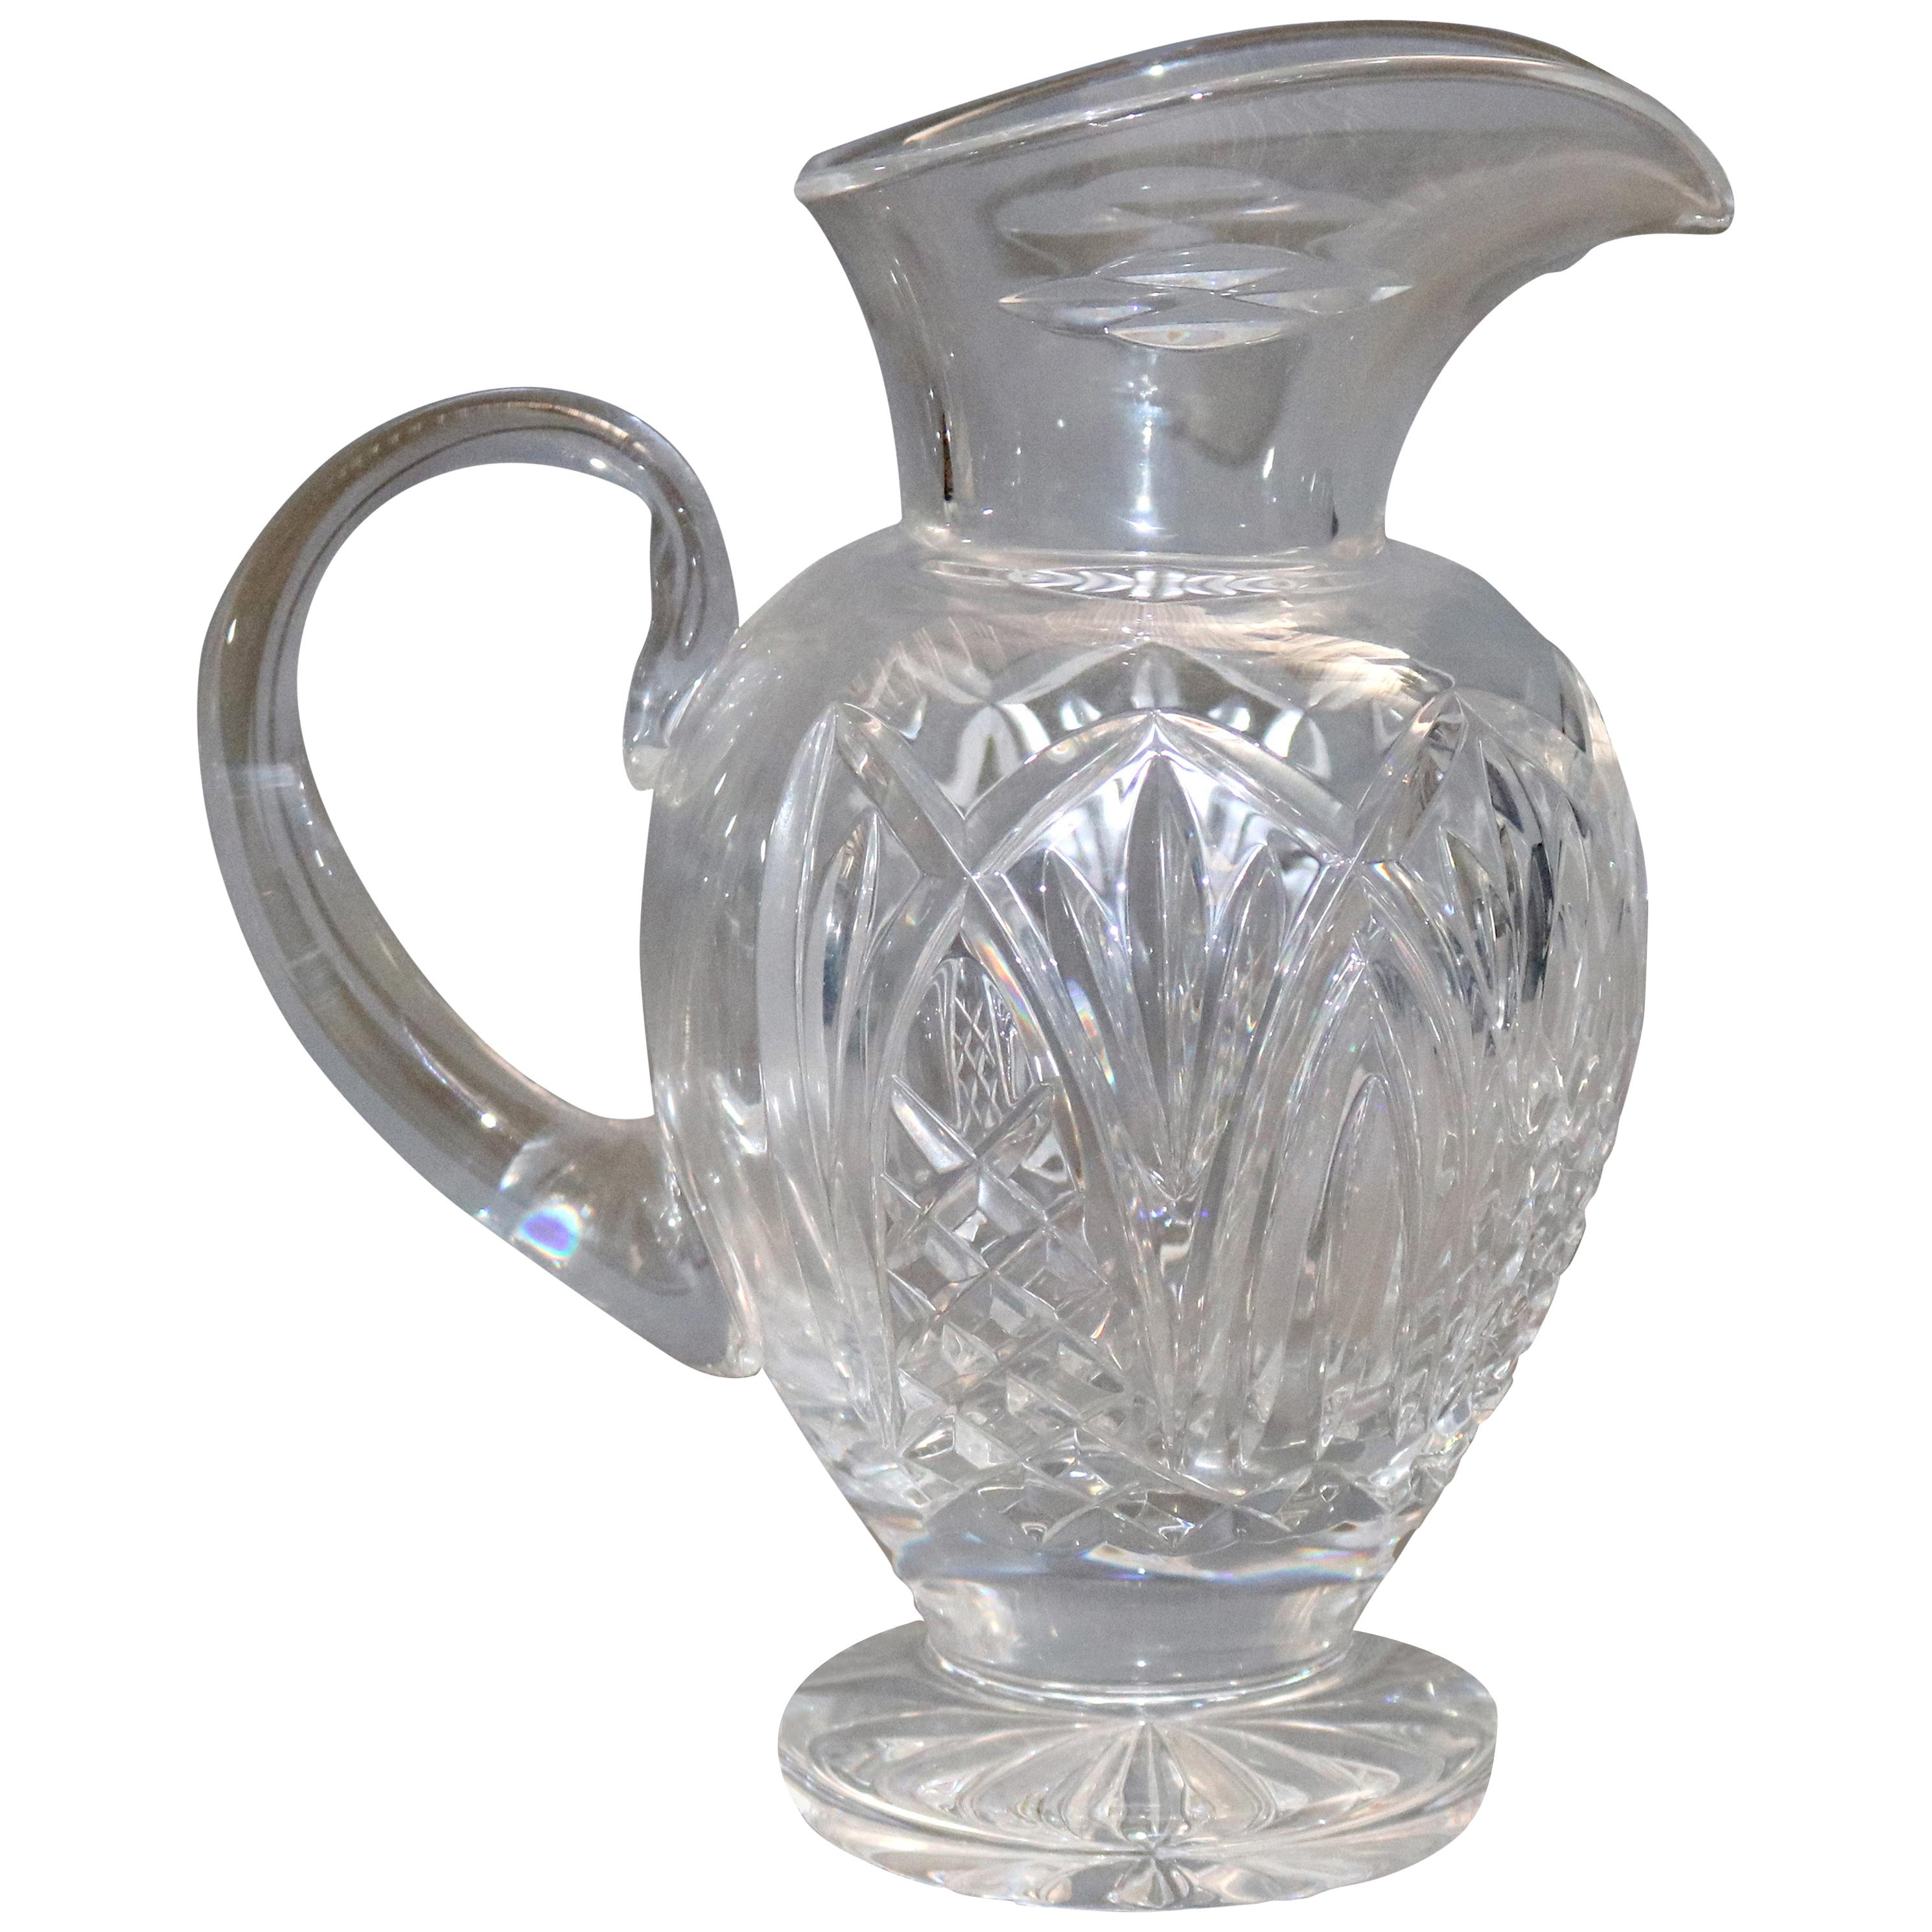 Vintage Waterford Crystal Bunratty Pitcher, Romance of Ireland Collection